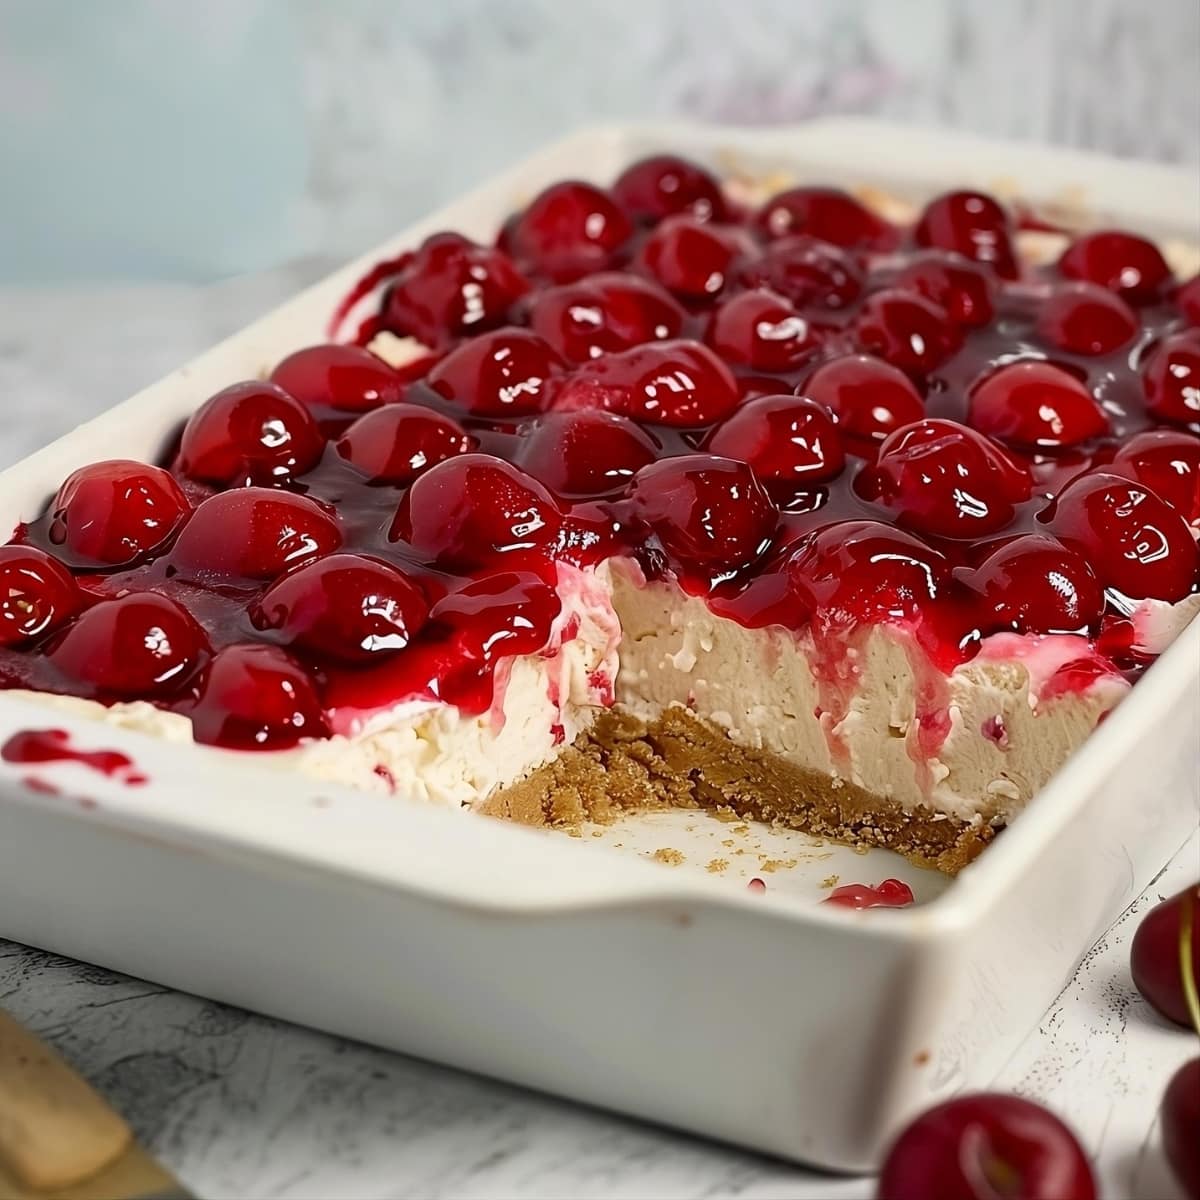 Cherry delight in a 8x8 inch baking pan.